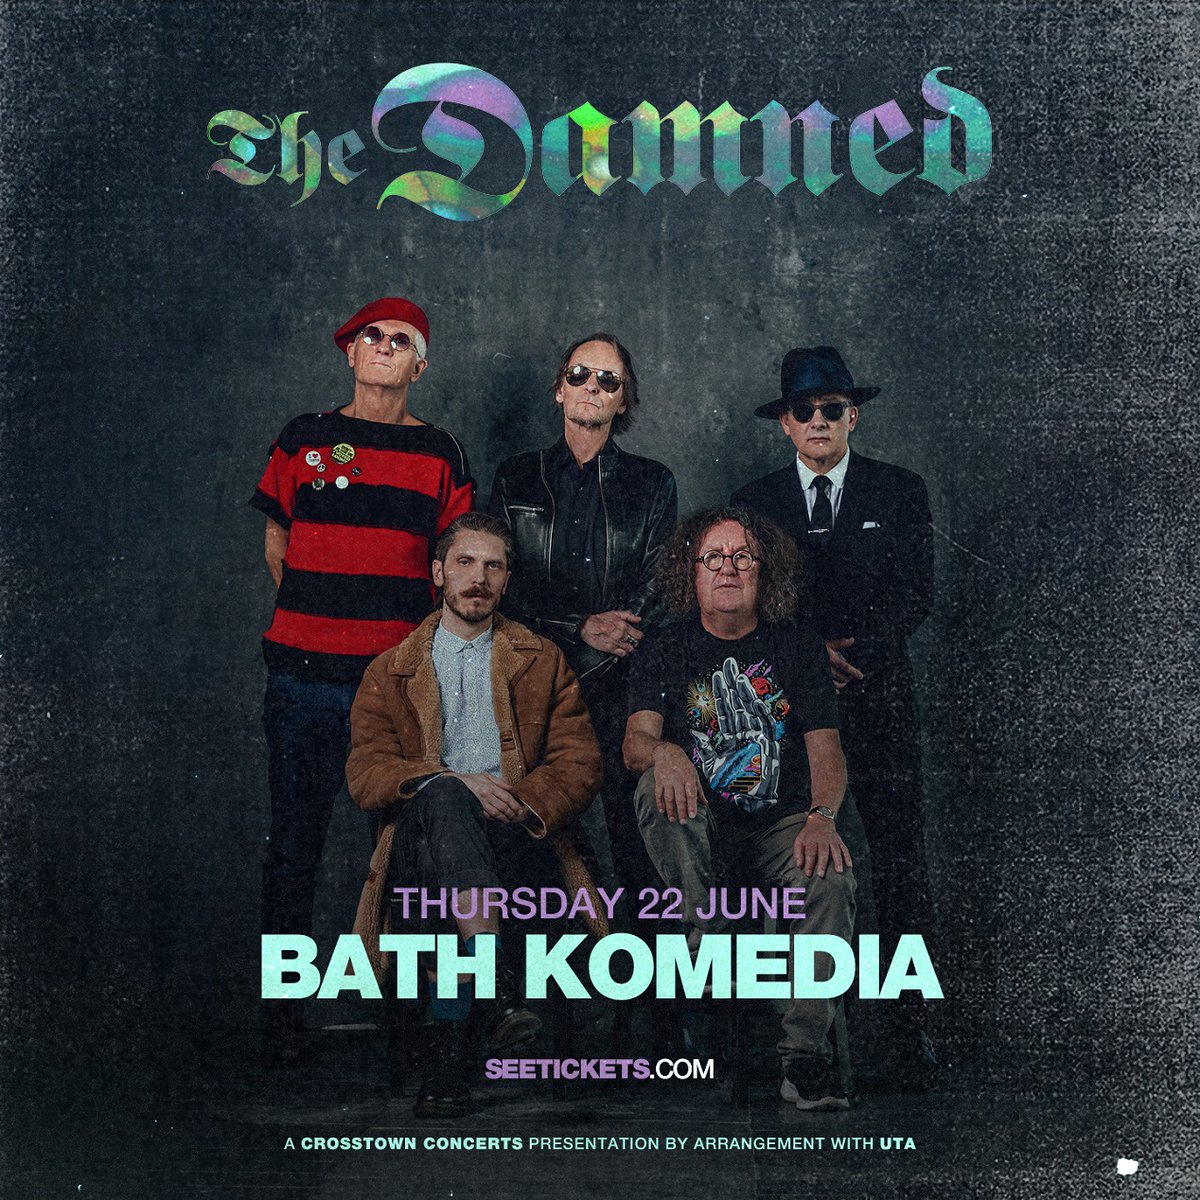 ON SALE NOW! 📢 - THE DAMNED (22/06/23) Following their formation in 1976, @thedamned remain one of the most groundbreaking bands coming out of the 70s British punk rock scene 🎸 🎟️ - komedia.co.uk/bath/music/the… DOORS 19:00 // AGES 14+ (UNDER 16’S MUST BE ACCOMPANIED BY AN ADULT)